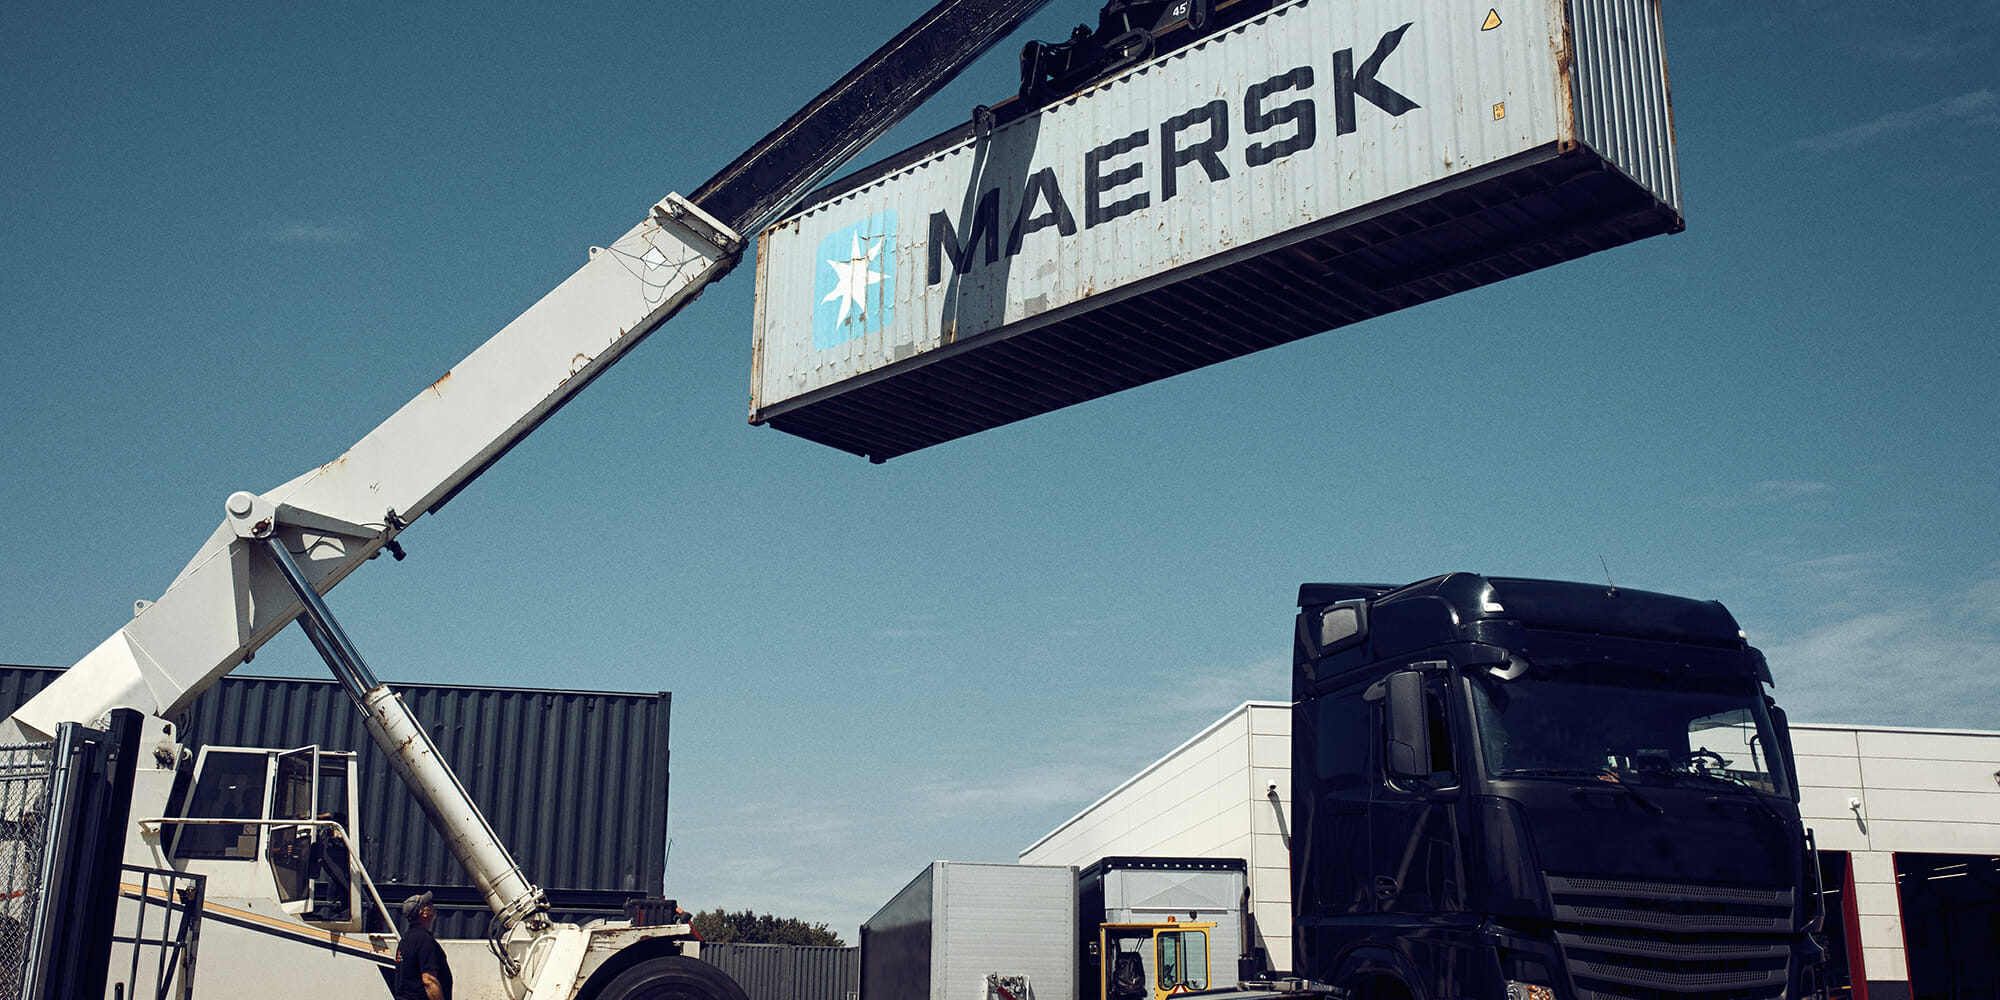 A Maersk container